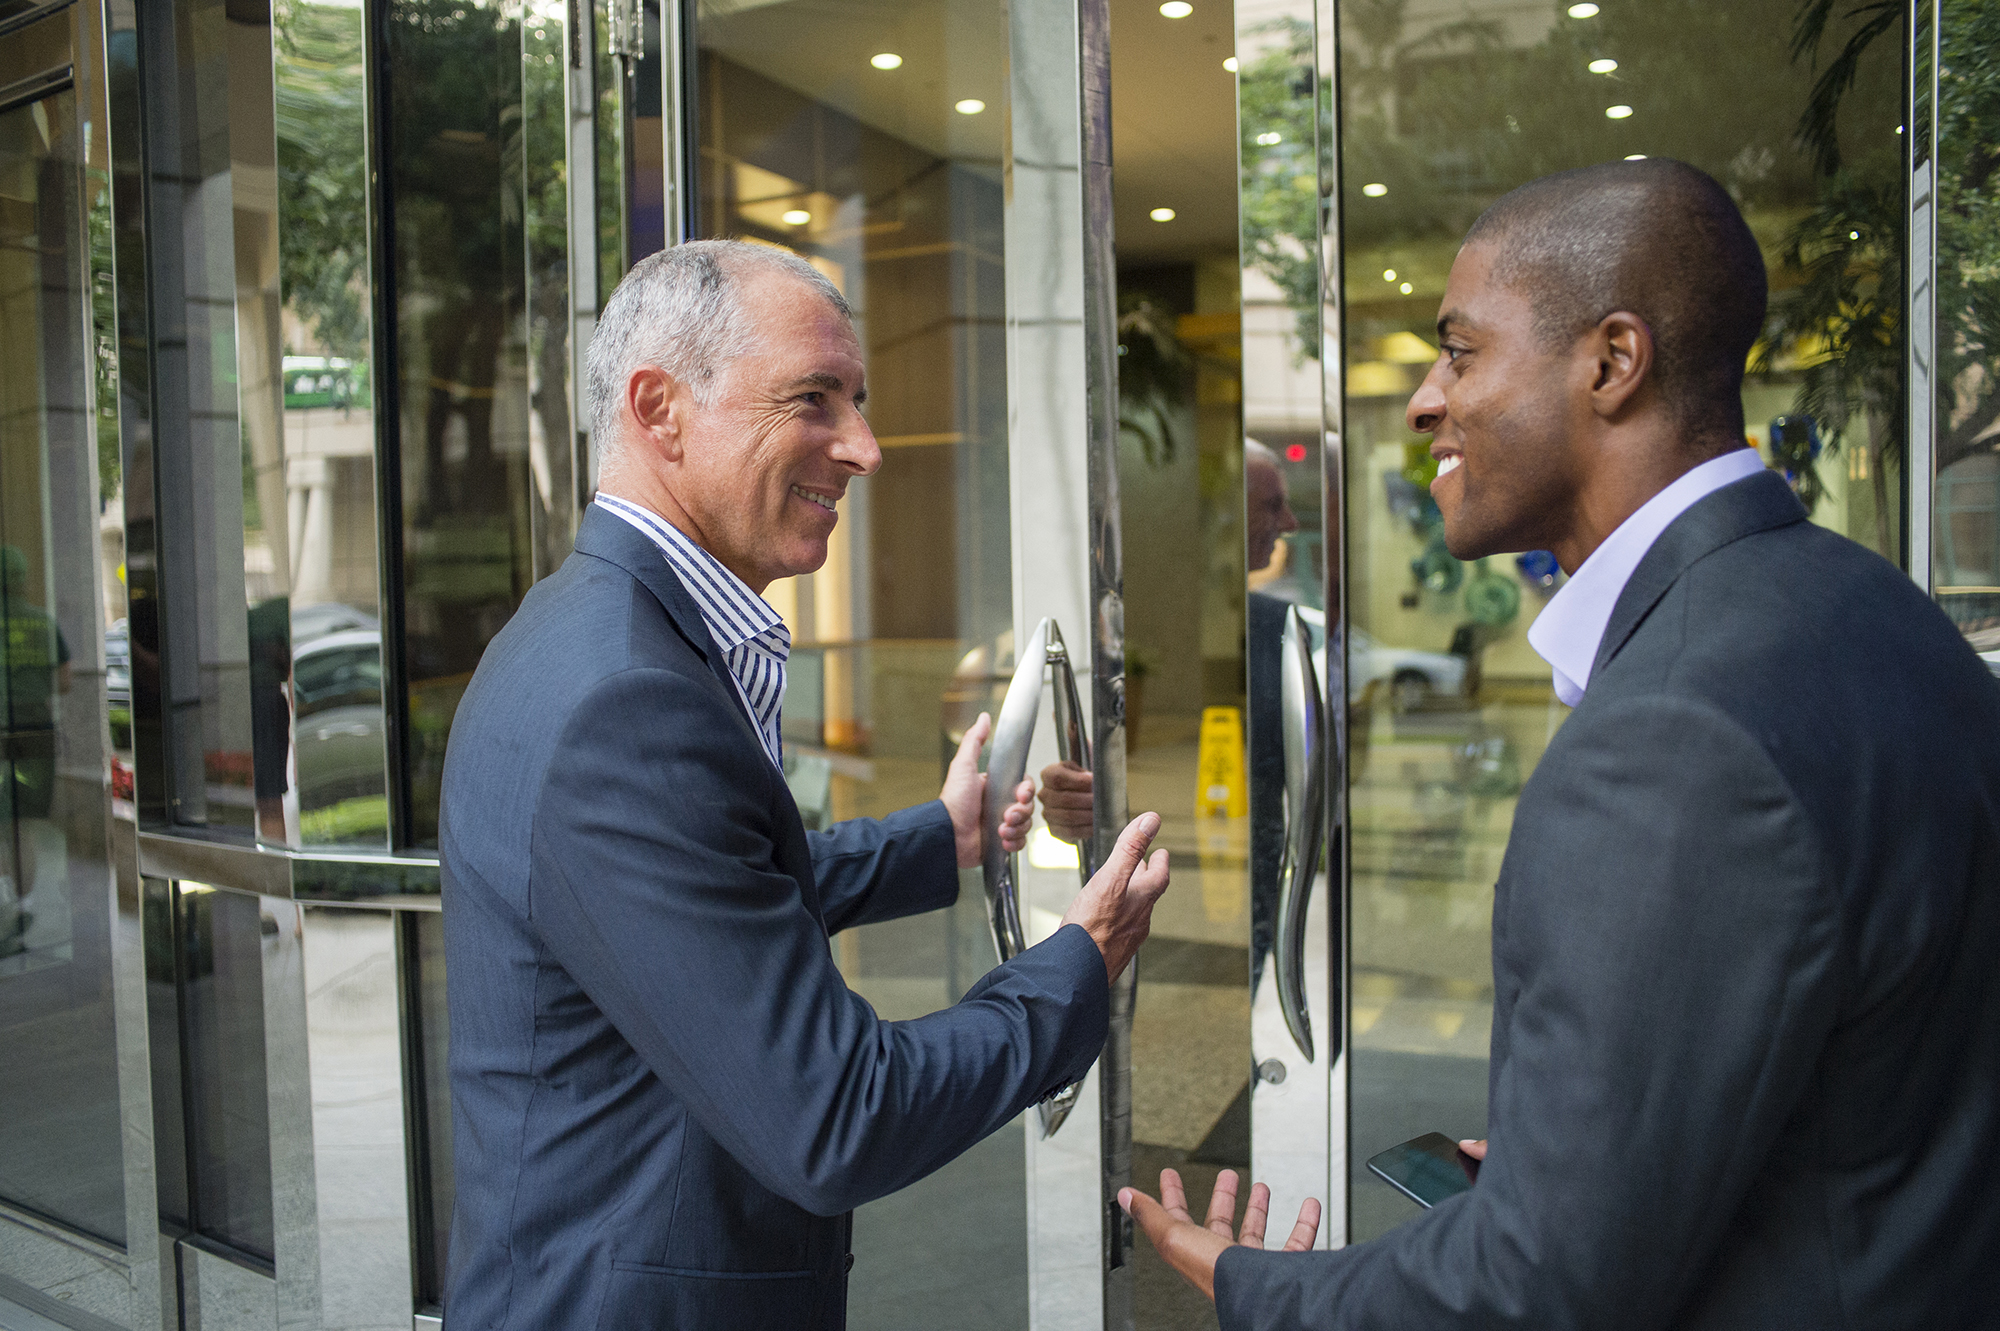 A smiling older man, dressed professionally, holds the office building door open for a fellow coworker.